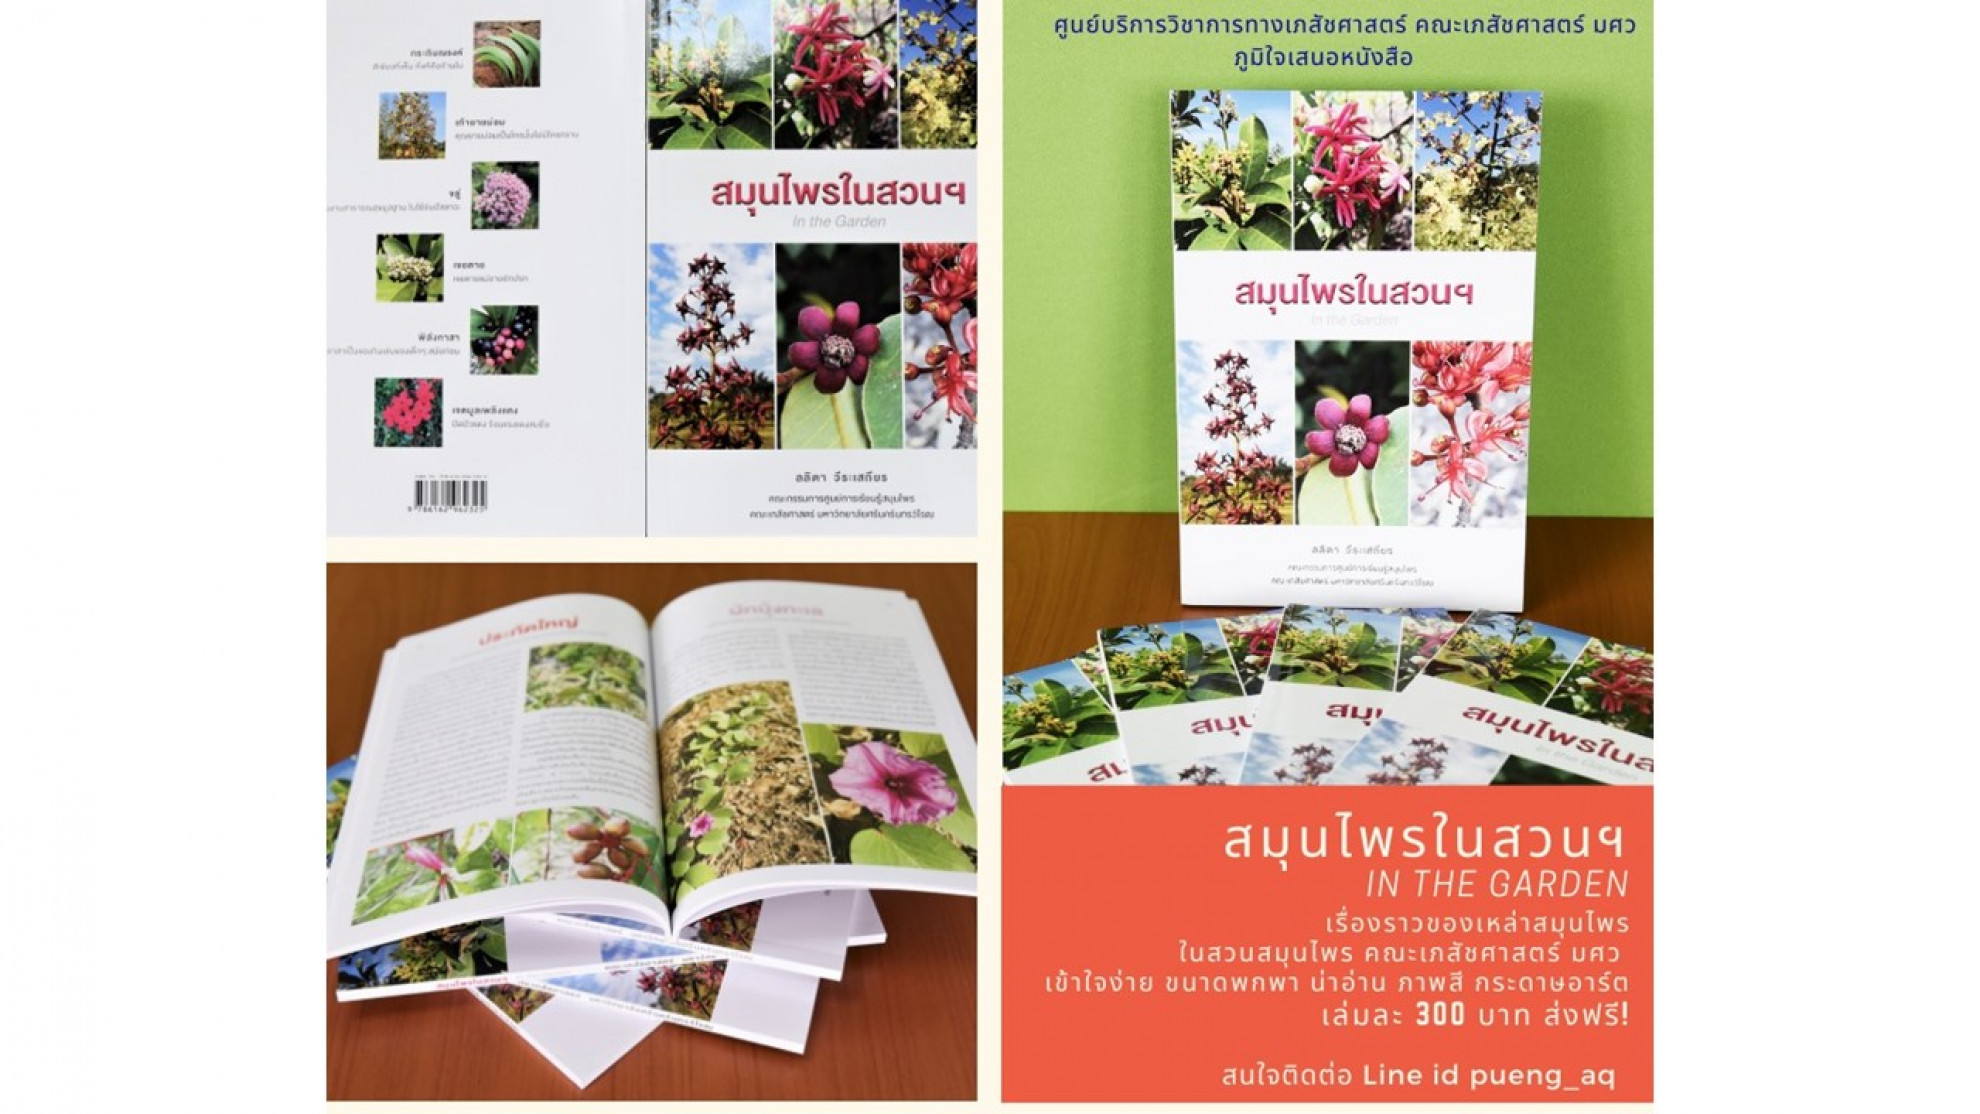 In the Garden: a book illustrating plants in the botanical garden  of the Faculty of Pharmacy, Srinakharinwirot University